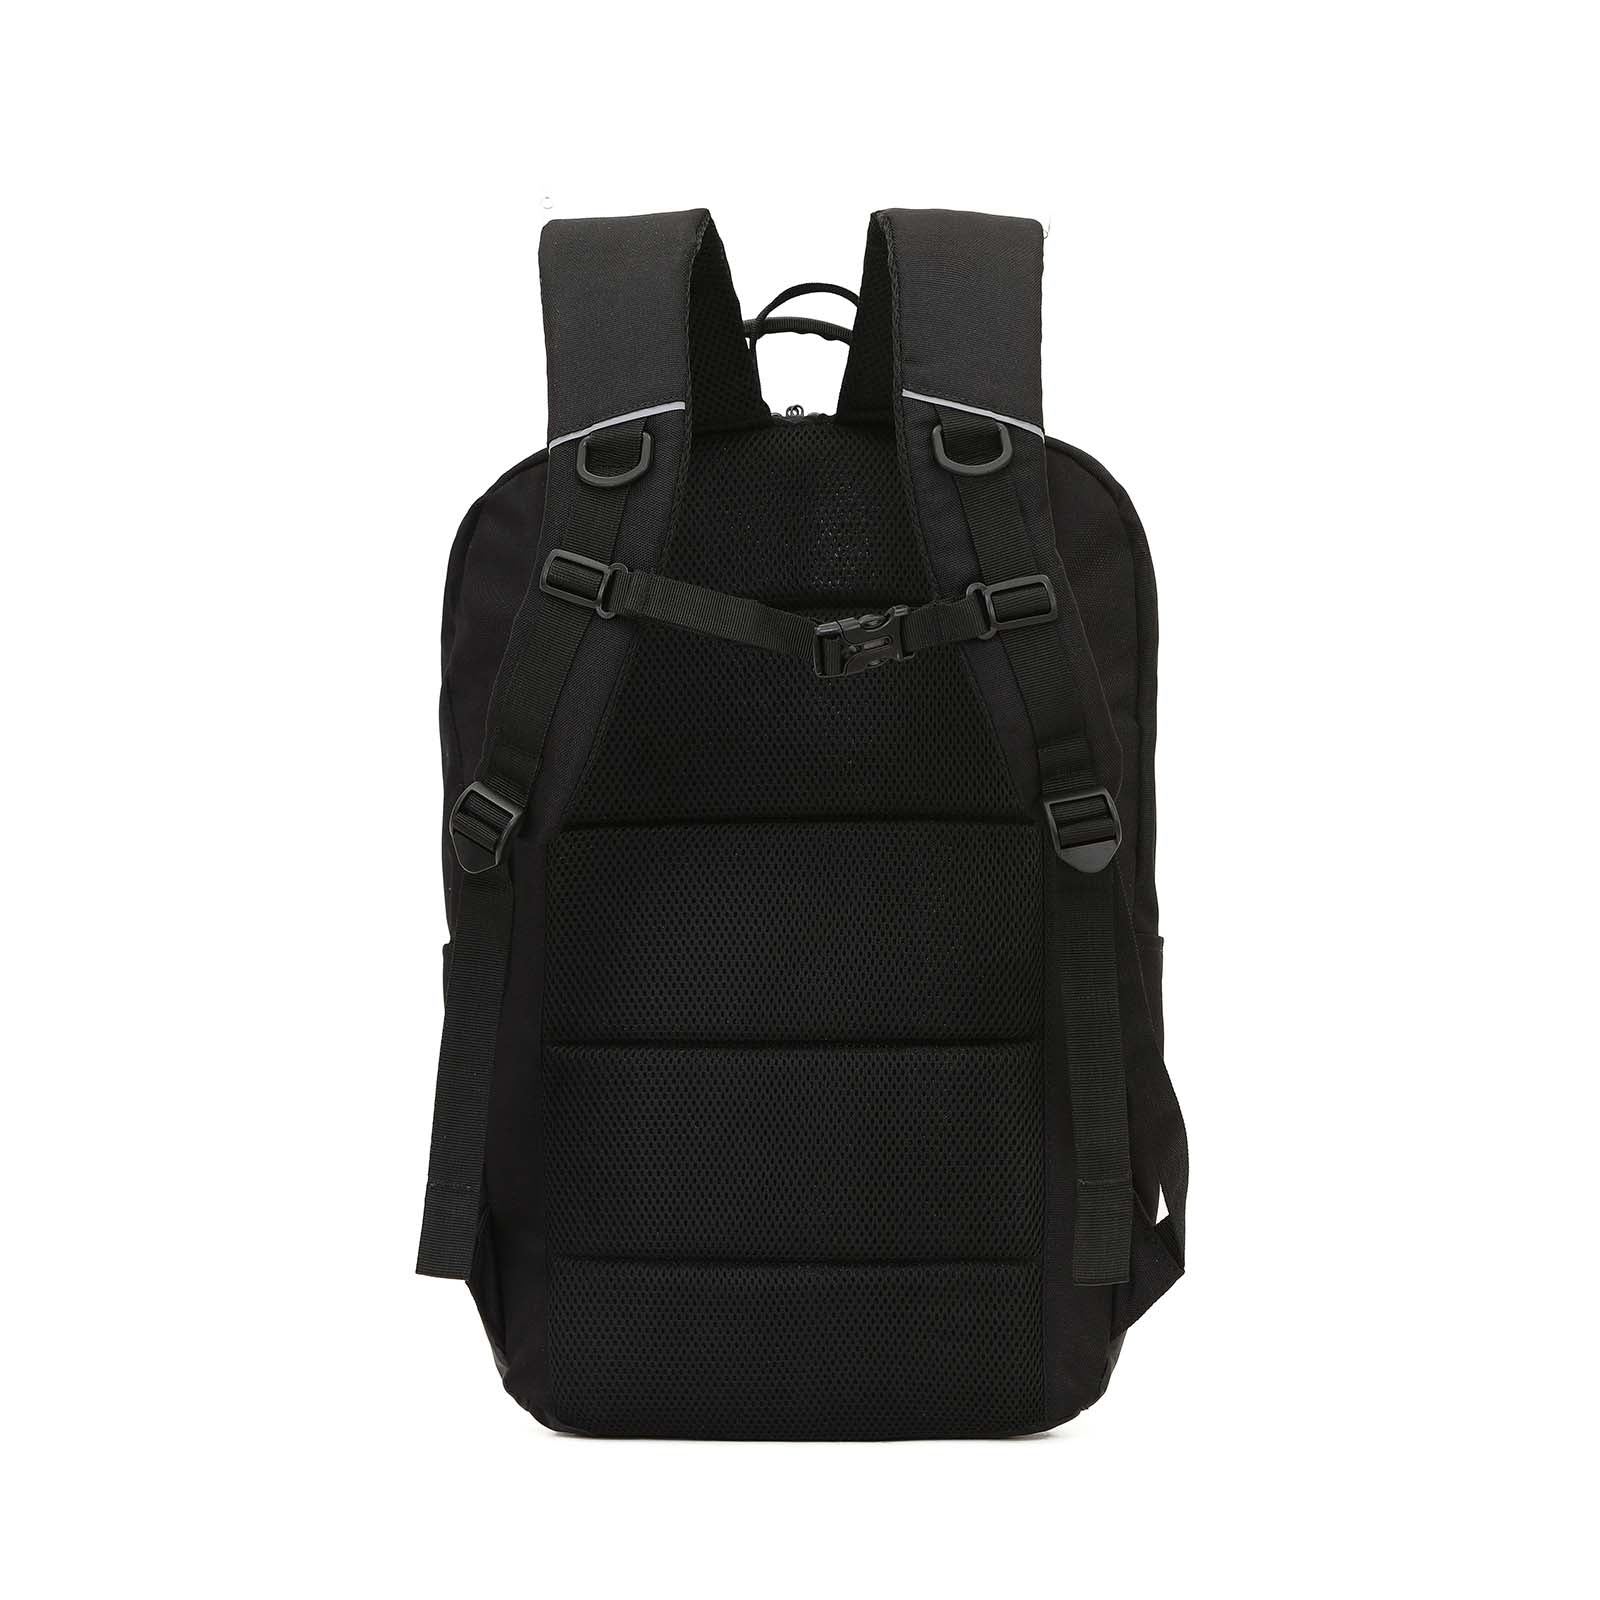 tosca-laptop-compartment-backpack-35l-black-front